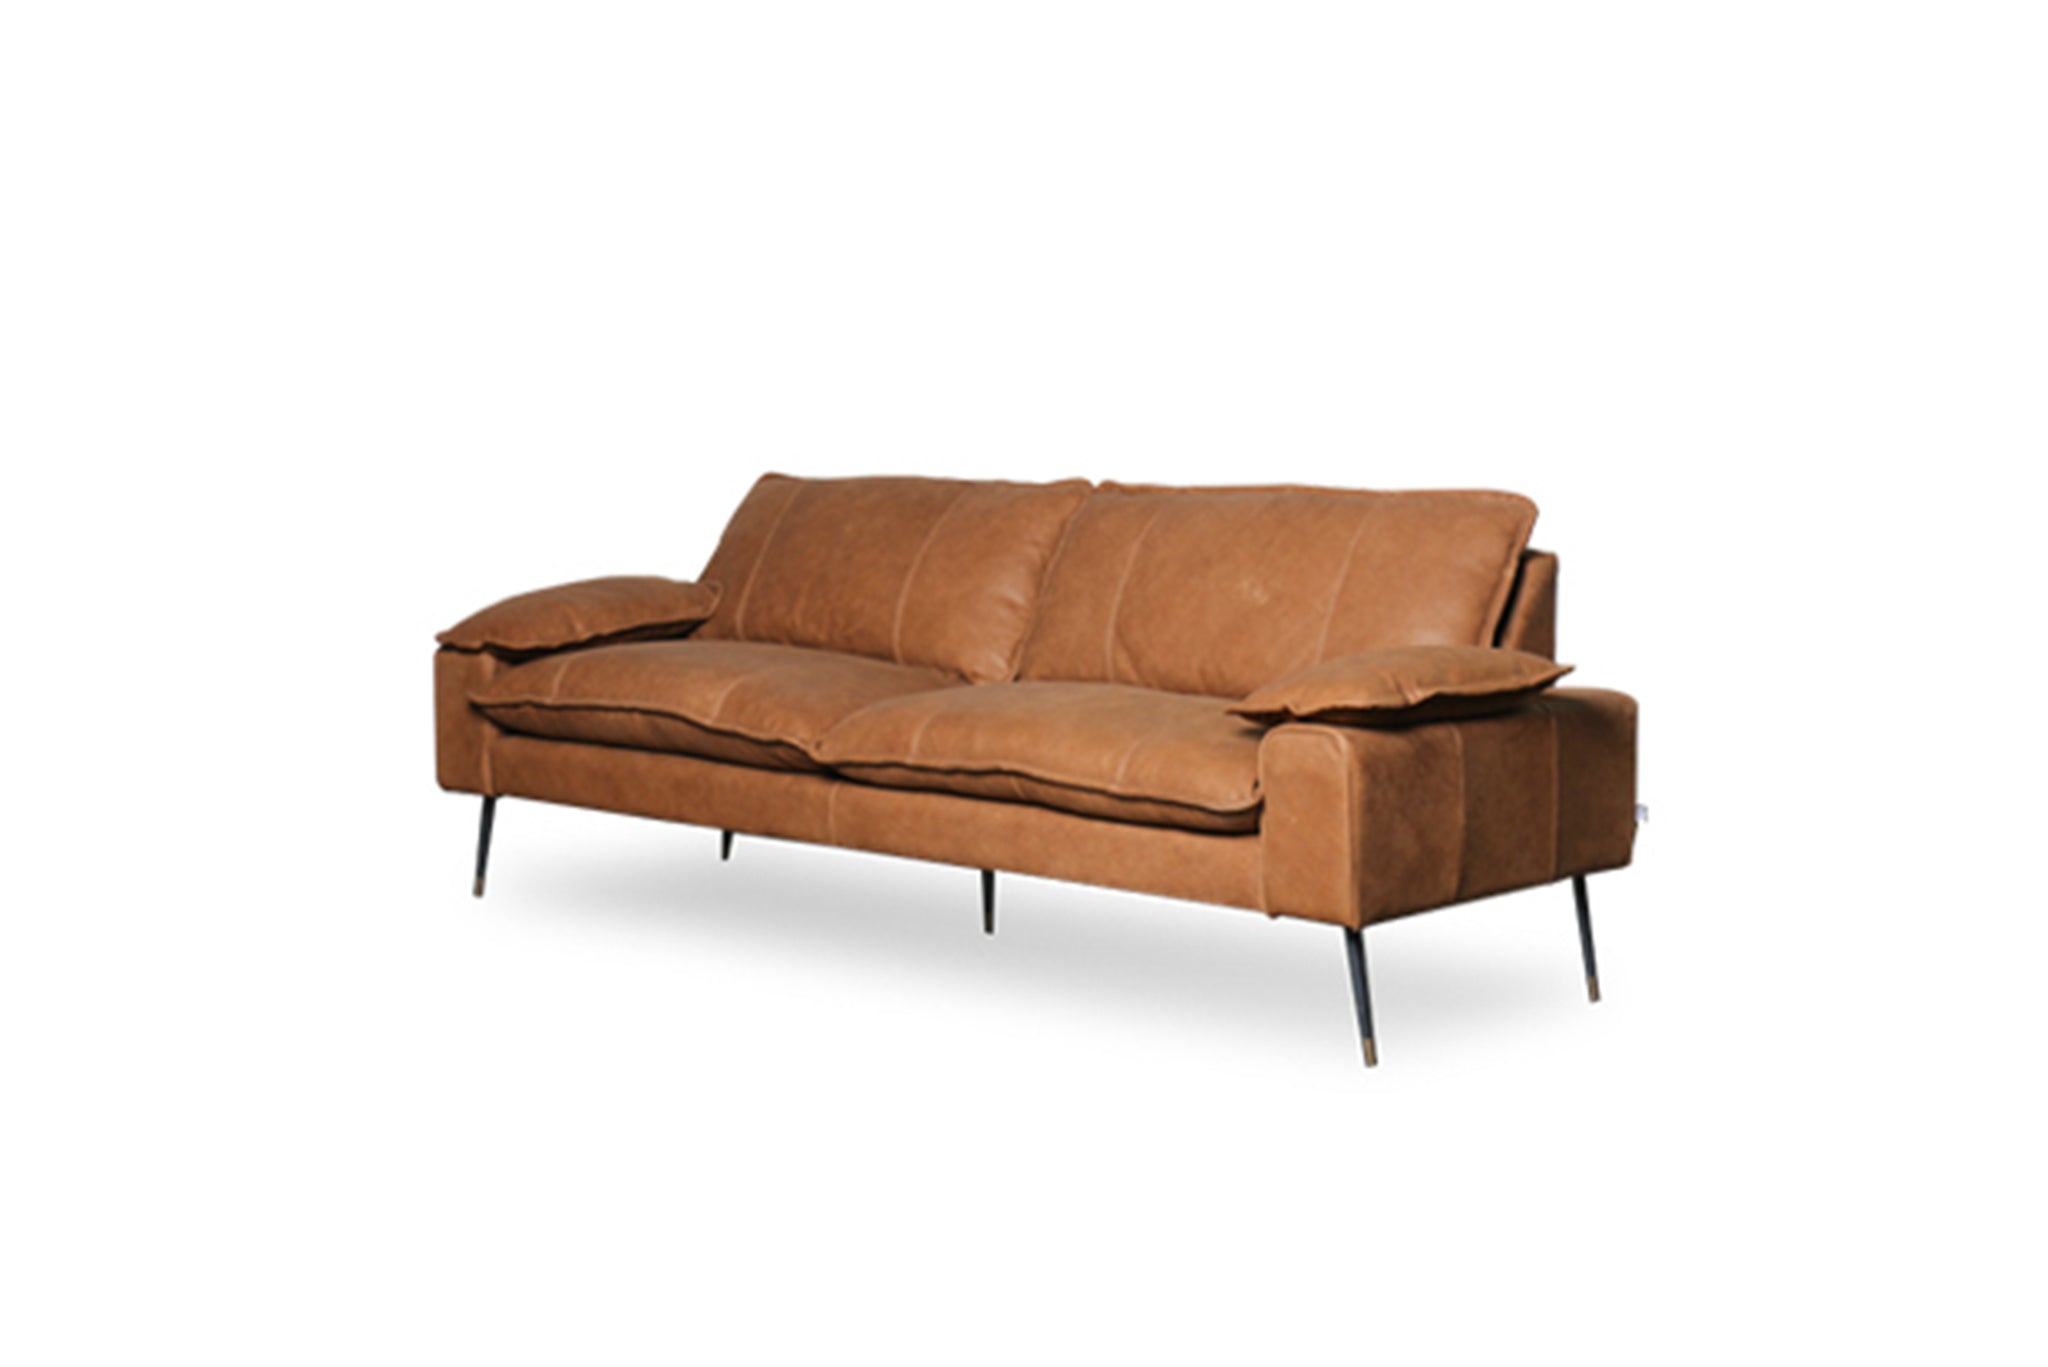 Marvin 3 Seater Leather Sofa